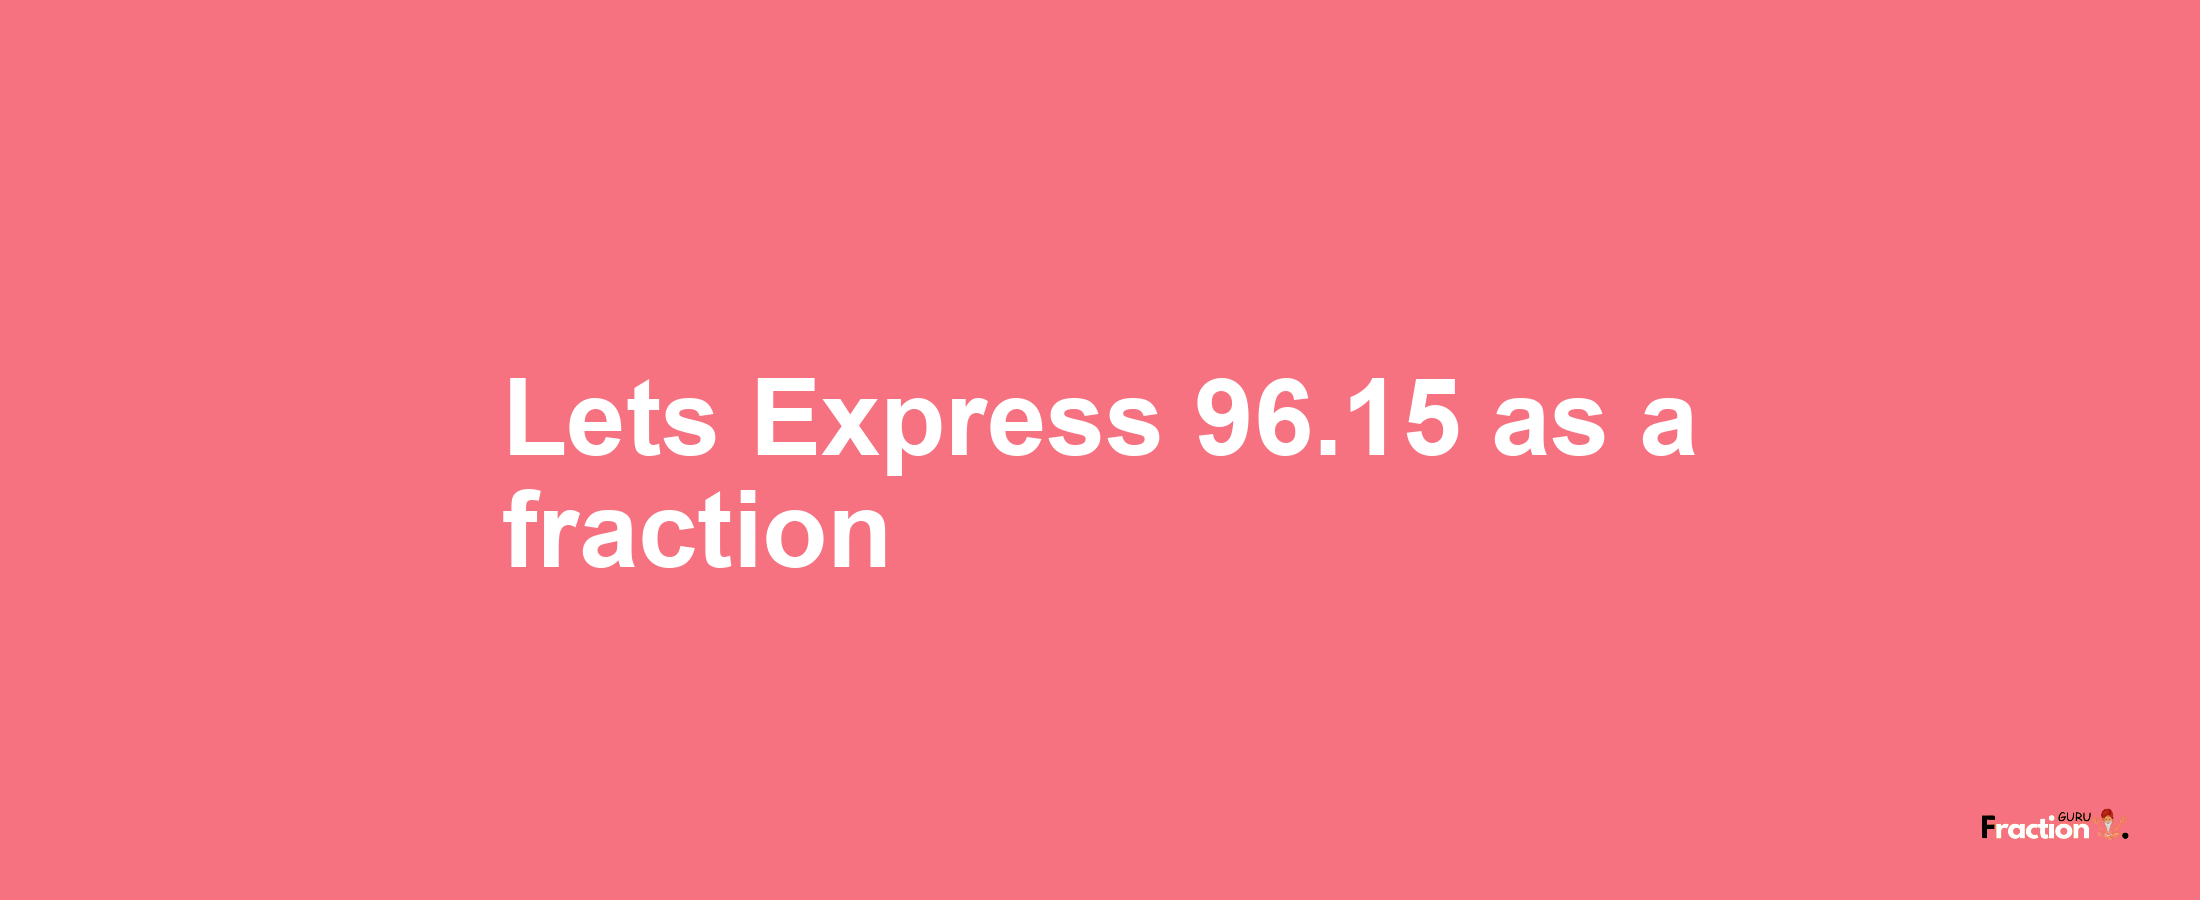 Lets Express 96.15 as afraction